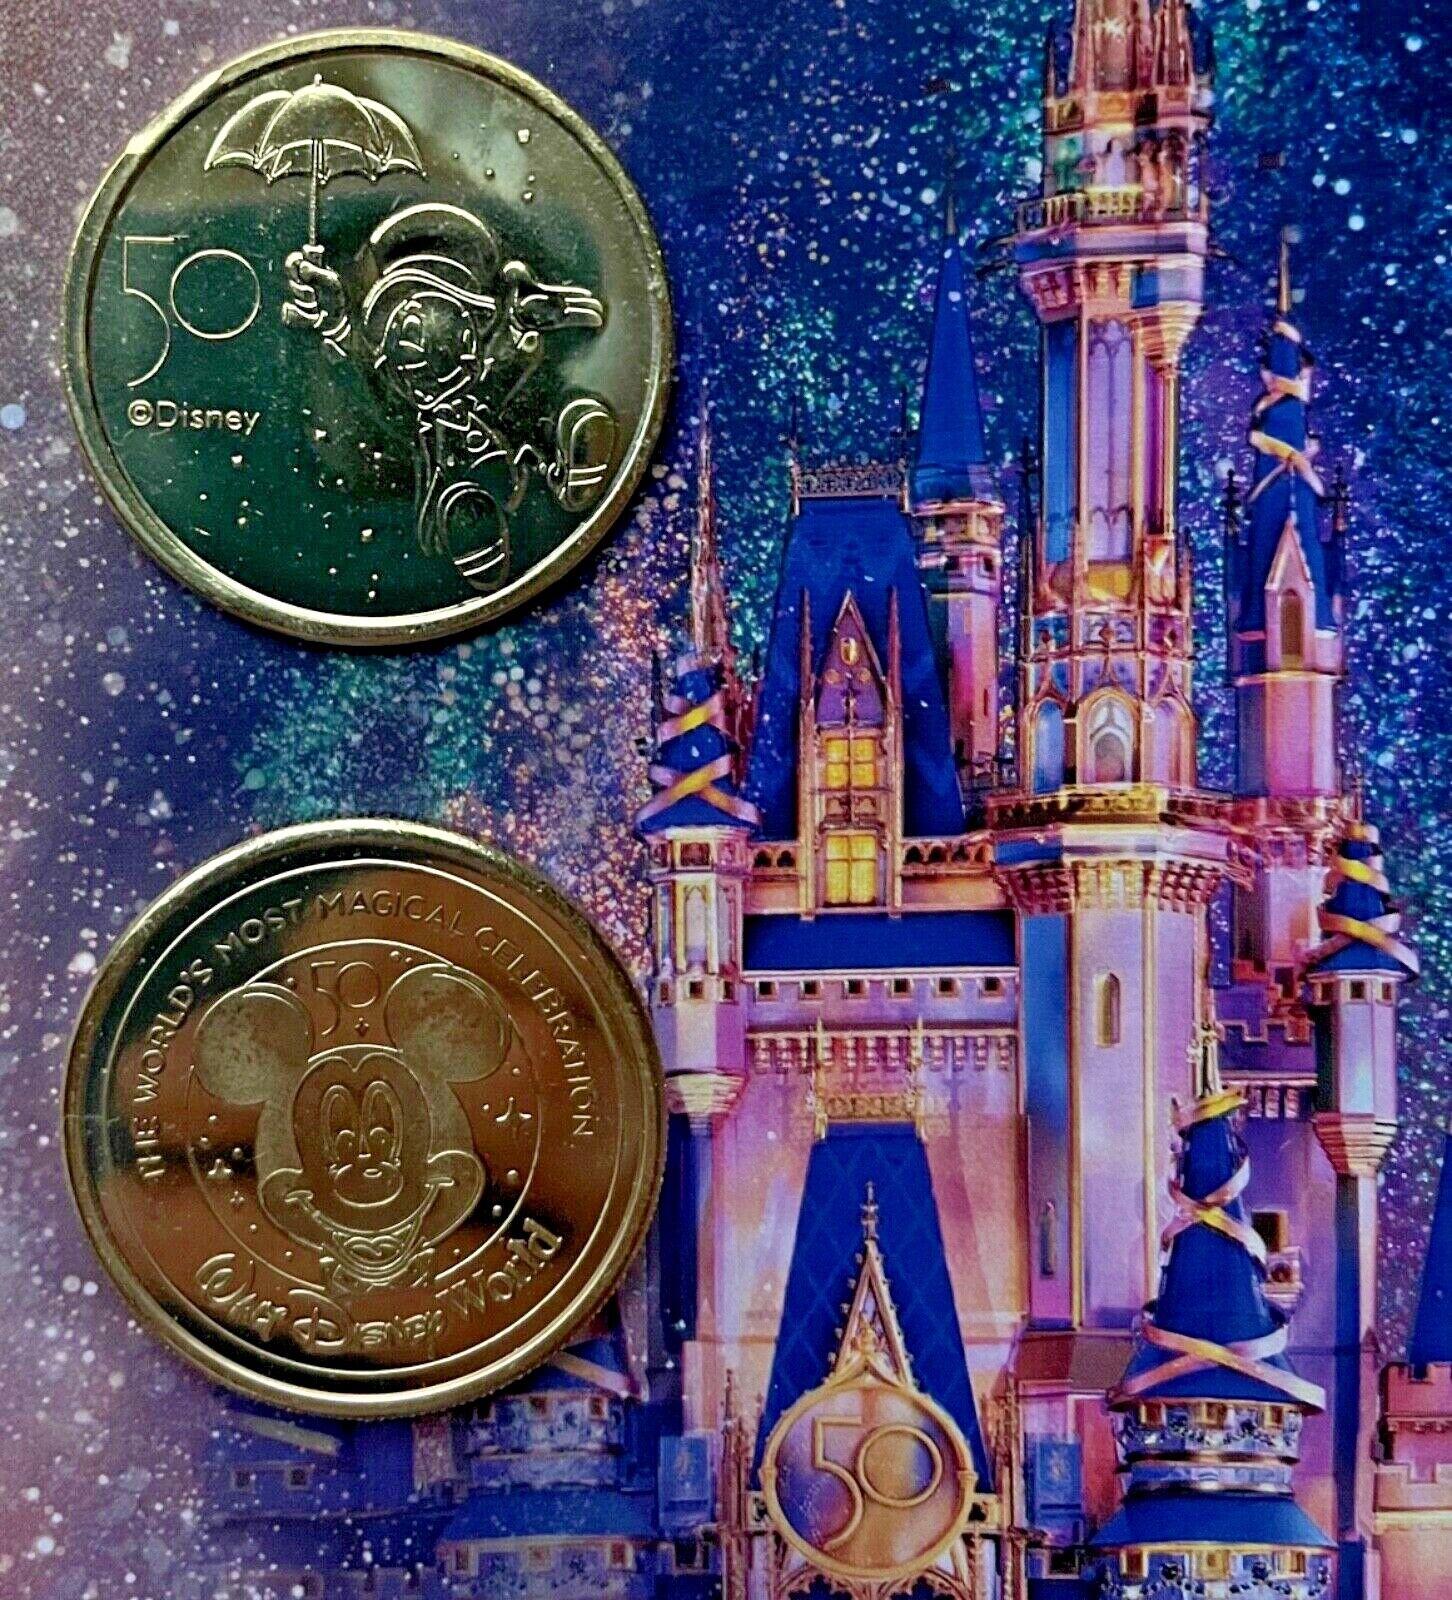 Walt Disney World 50th Anniversary Commemorative Gold Coins all characters +gift